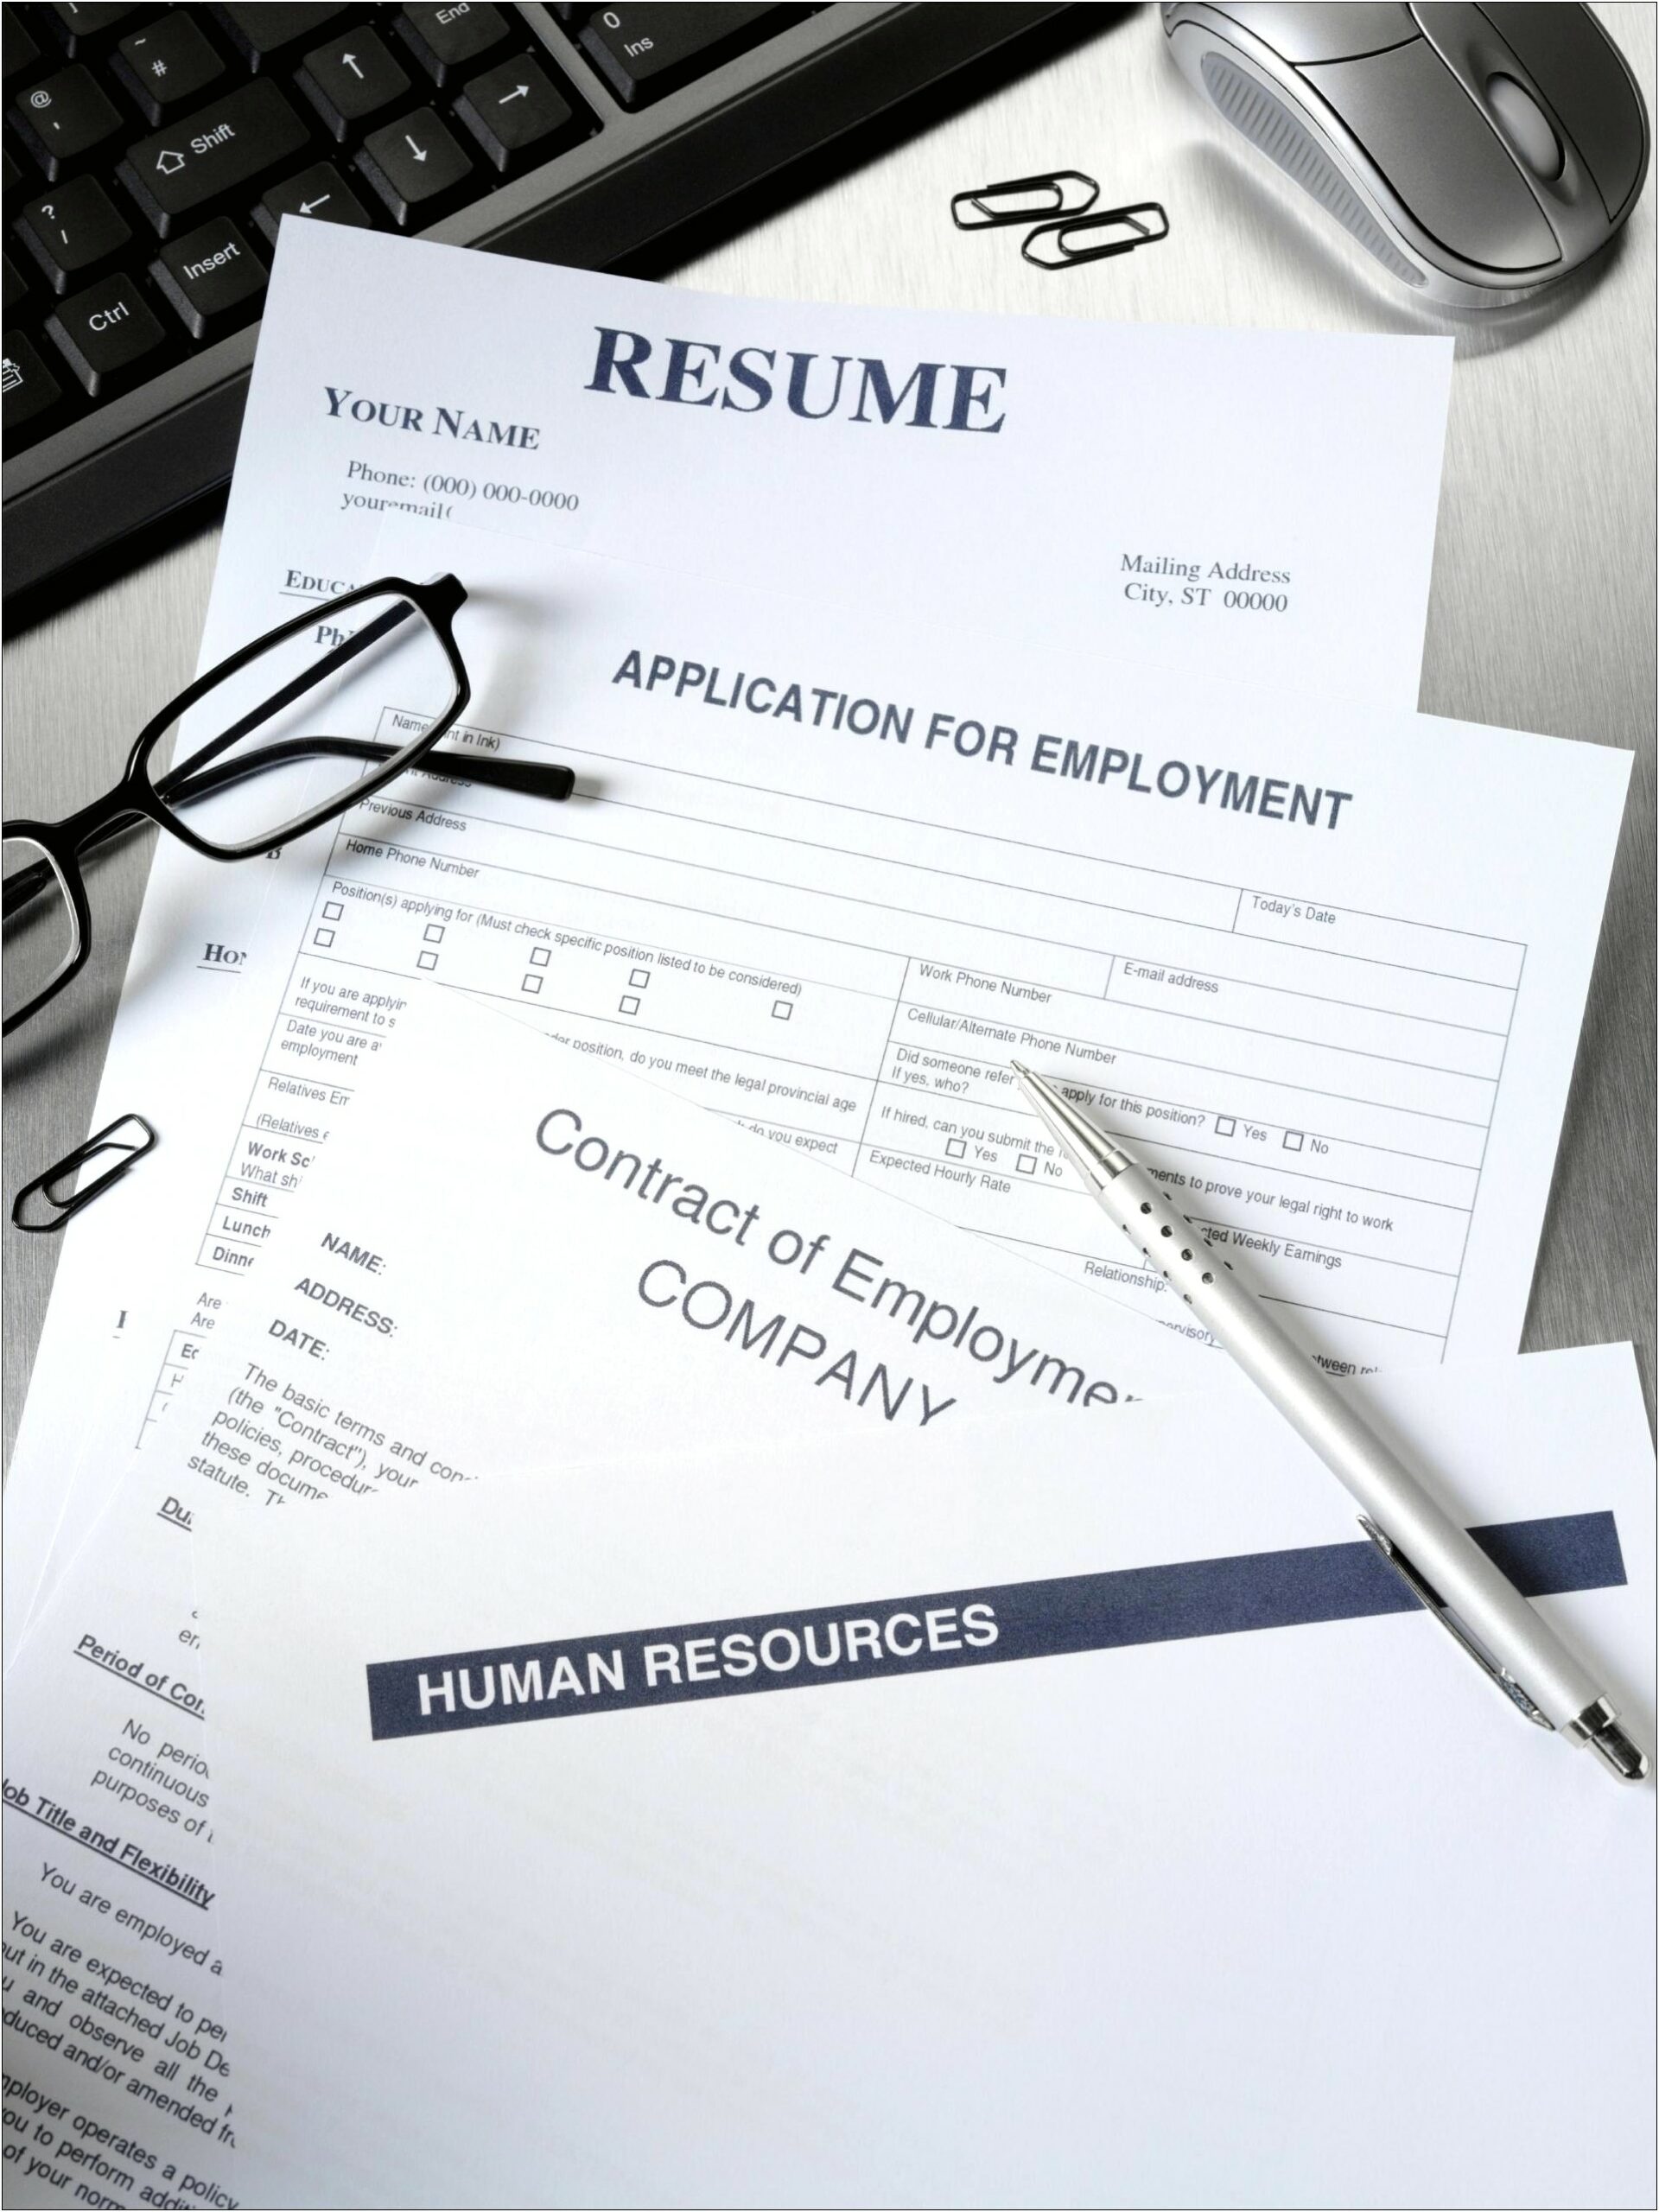 Keywords For Facilities Management Resume